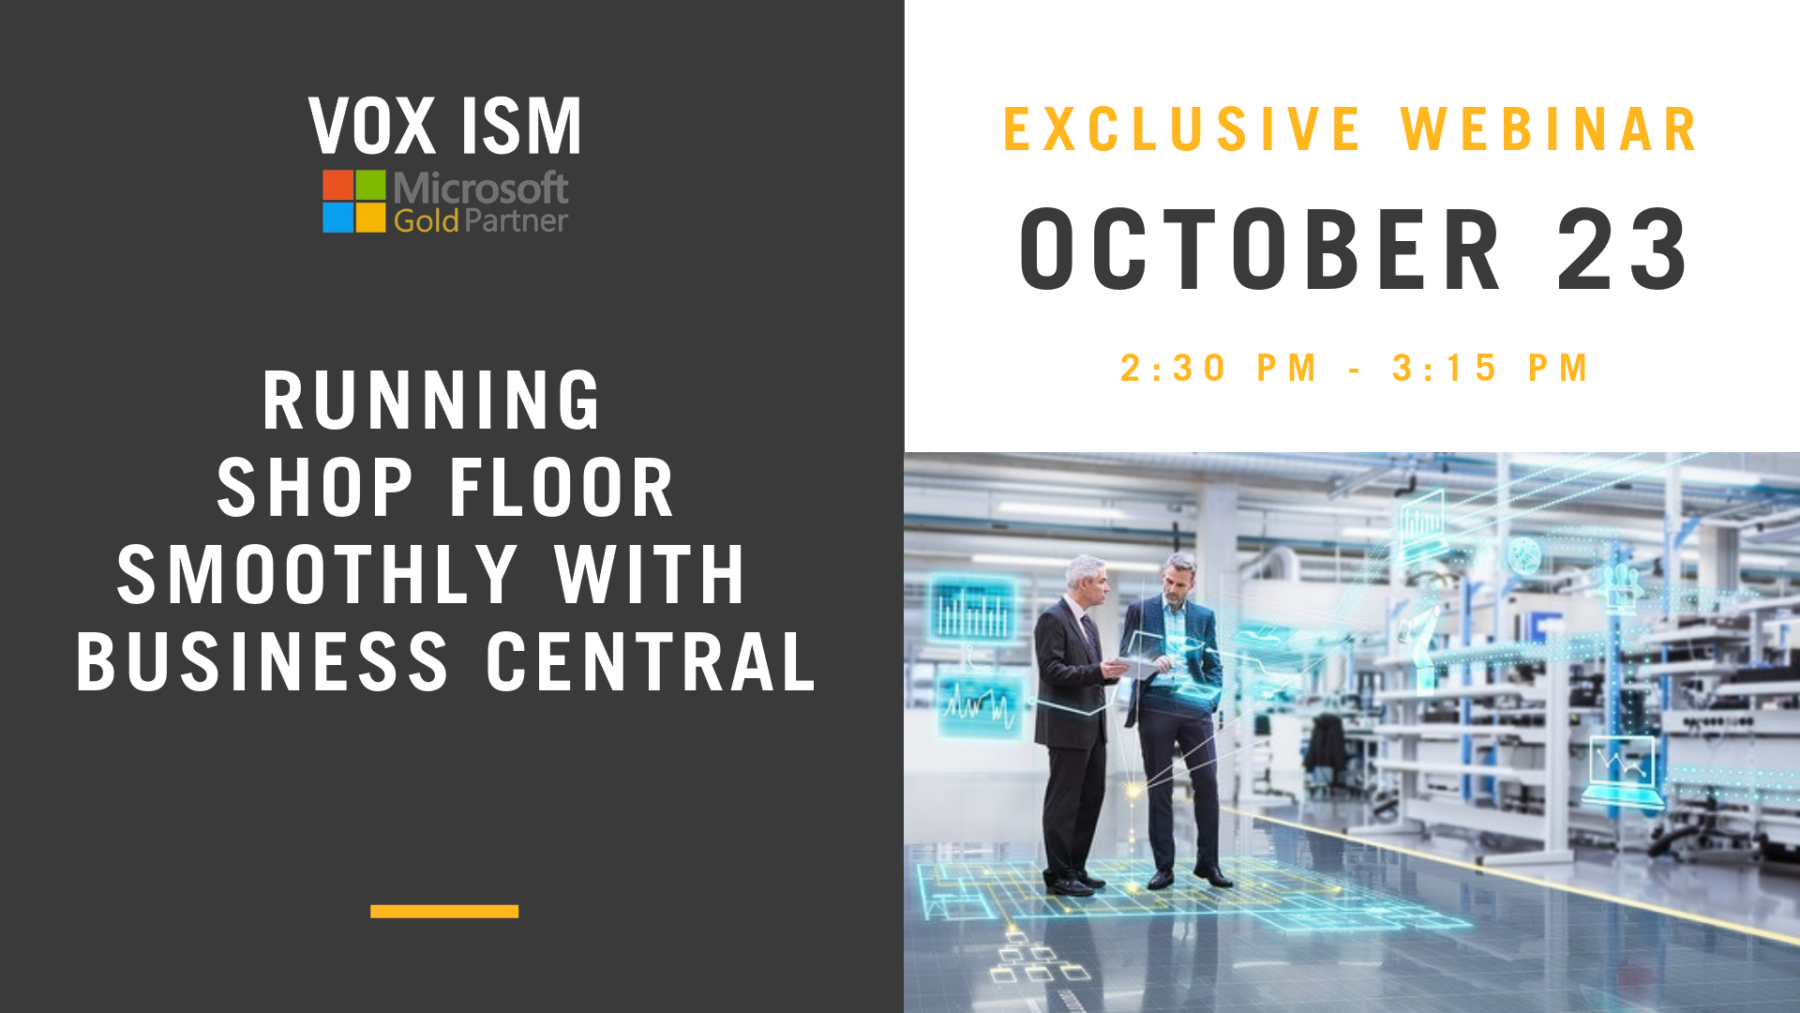 Running the Shop Floor Smoothly with Business Central - October 23 - Webinar - VOX ISM